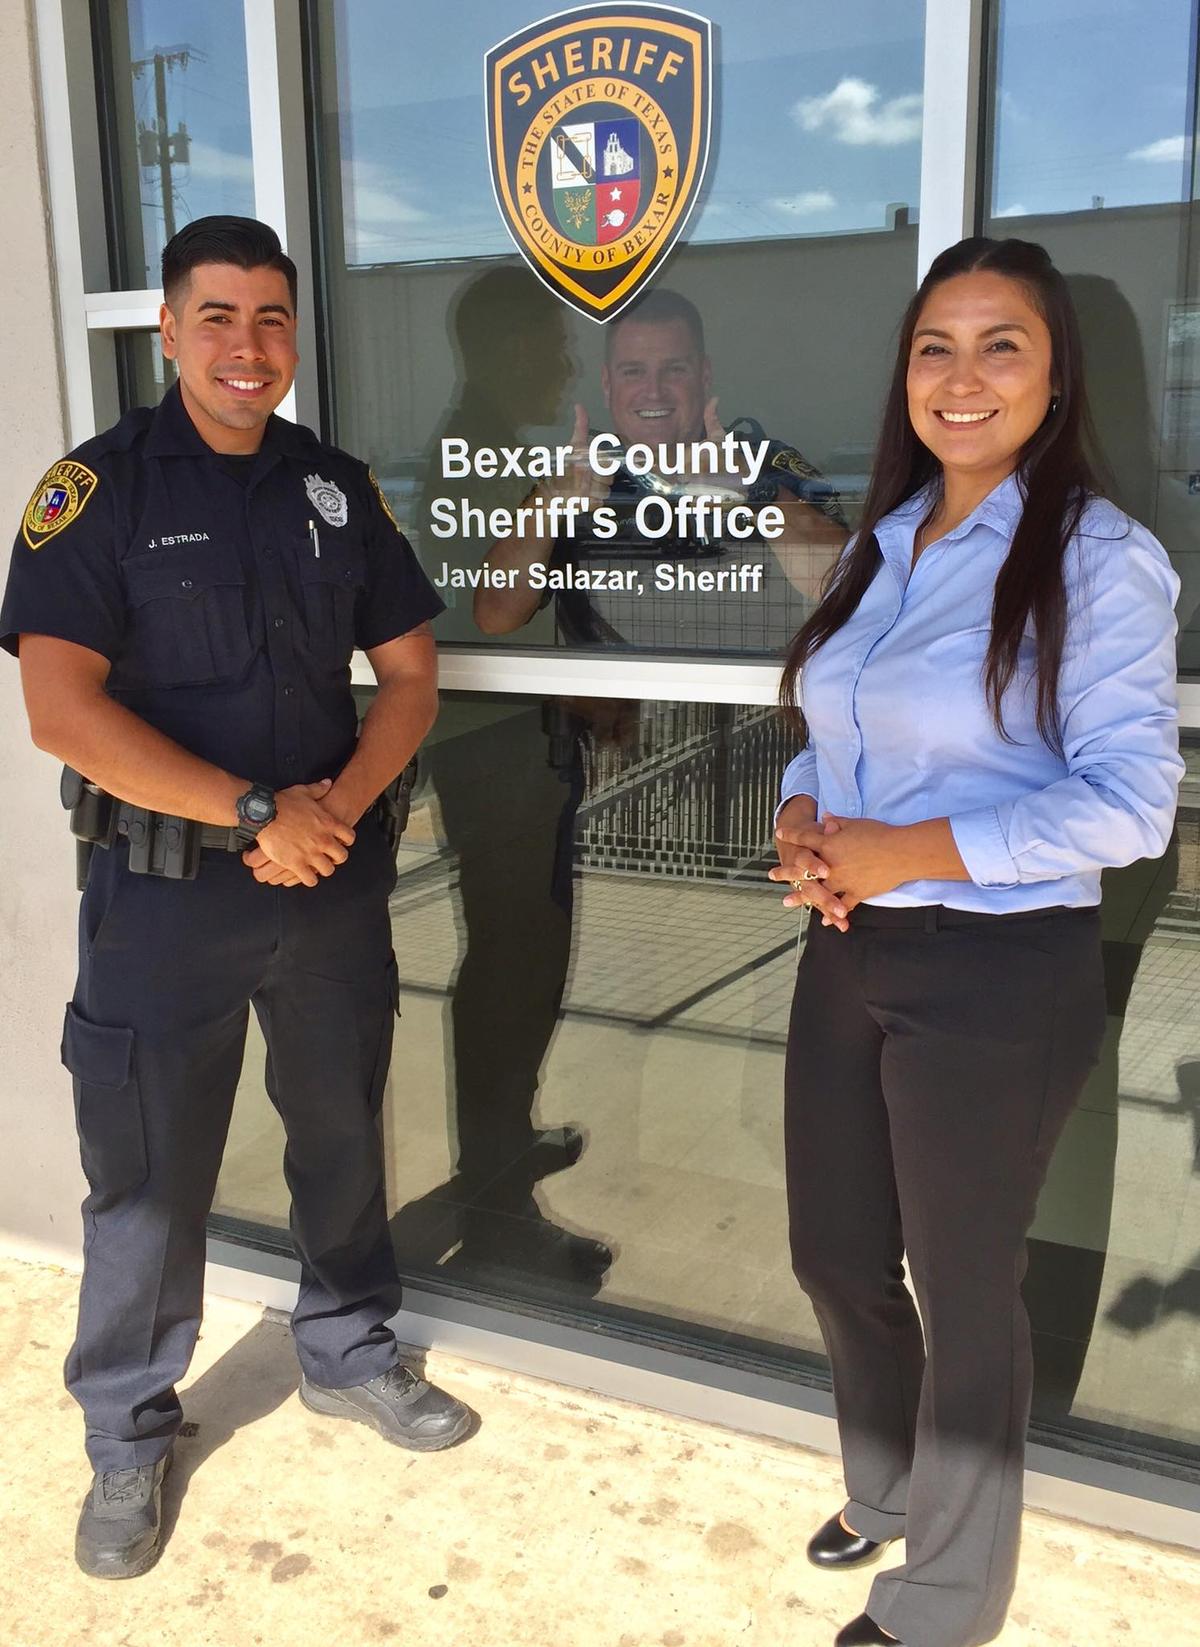 (Courtesy of <a href="https://www.facebook.com/BCSORECRUITMENT/photos/a.1911934812356024/1953172581565580/?type=3&theater">Bexar County Sheriff’s Recruiting Team</a>)